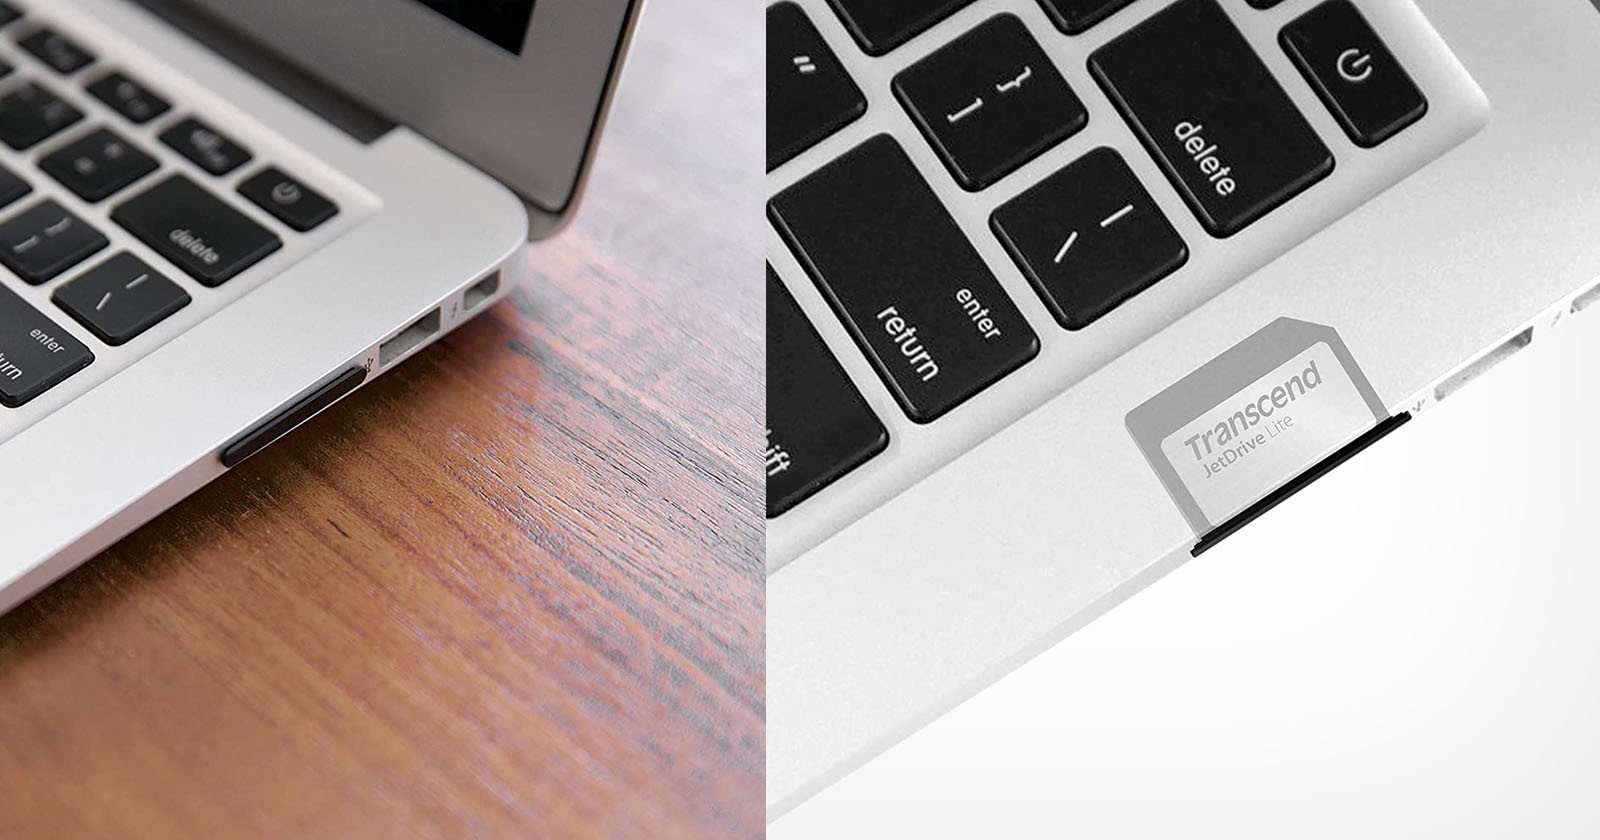 Transcends Half-Sized 1TB SD Card Sits Flush with a MacBook